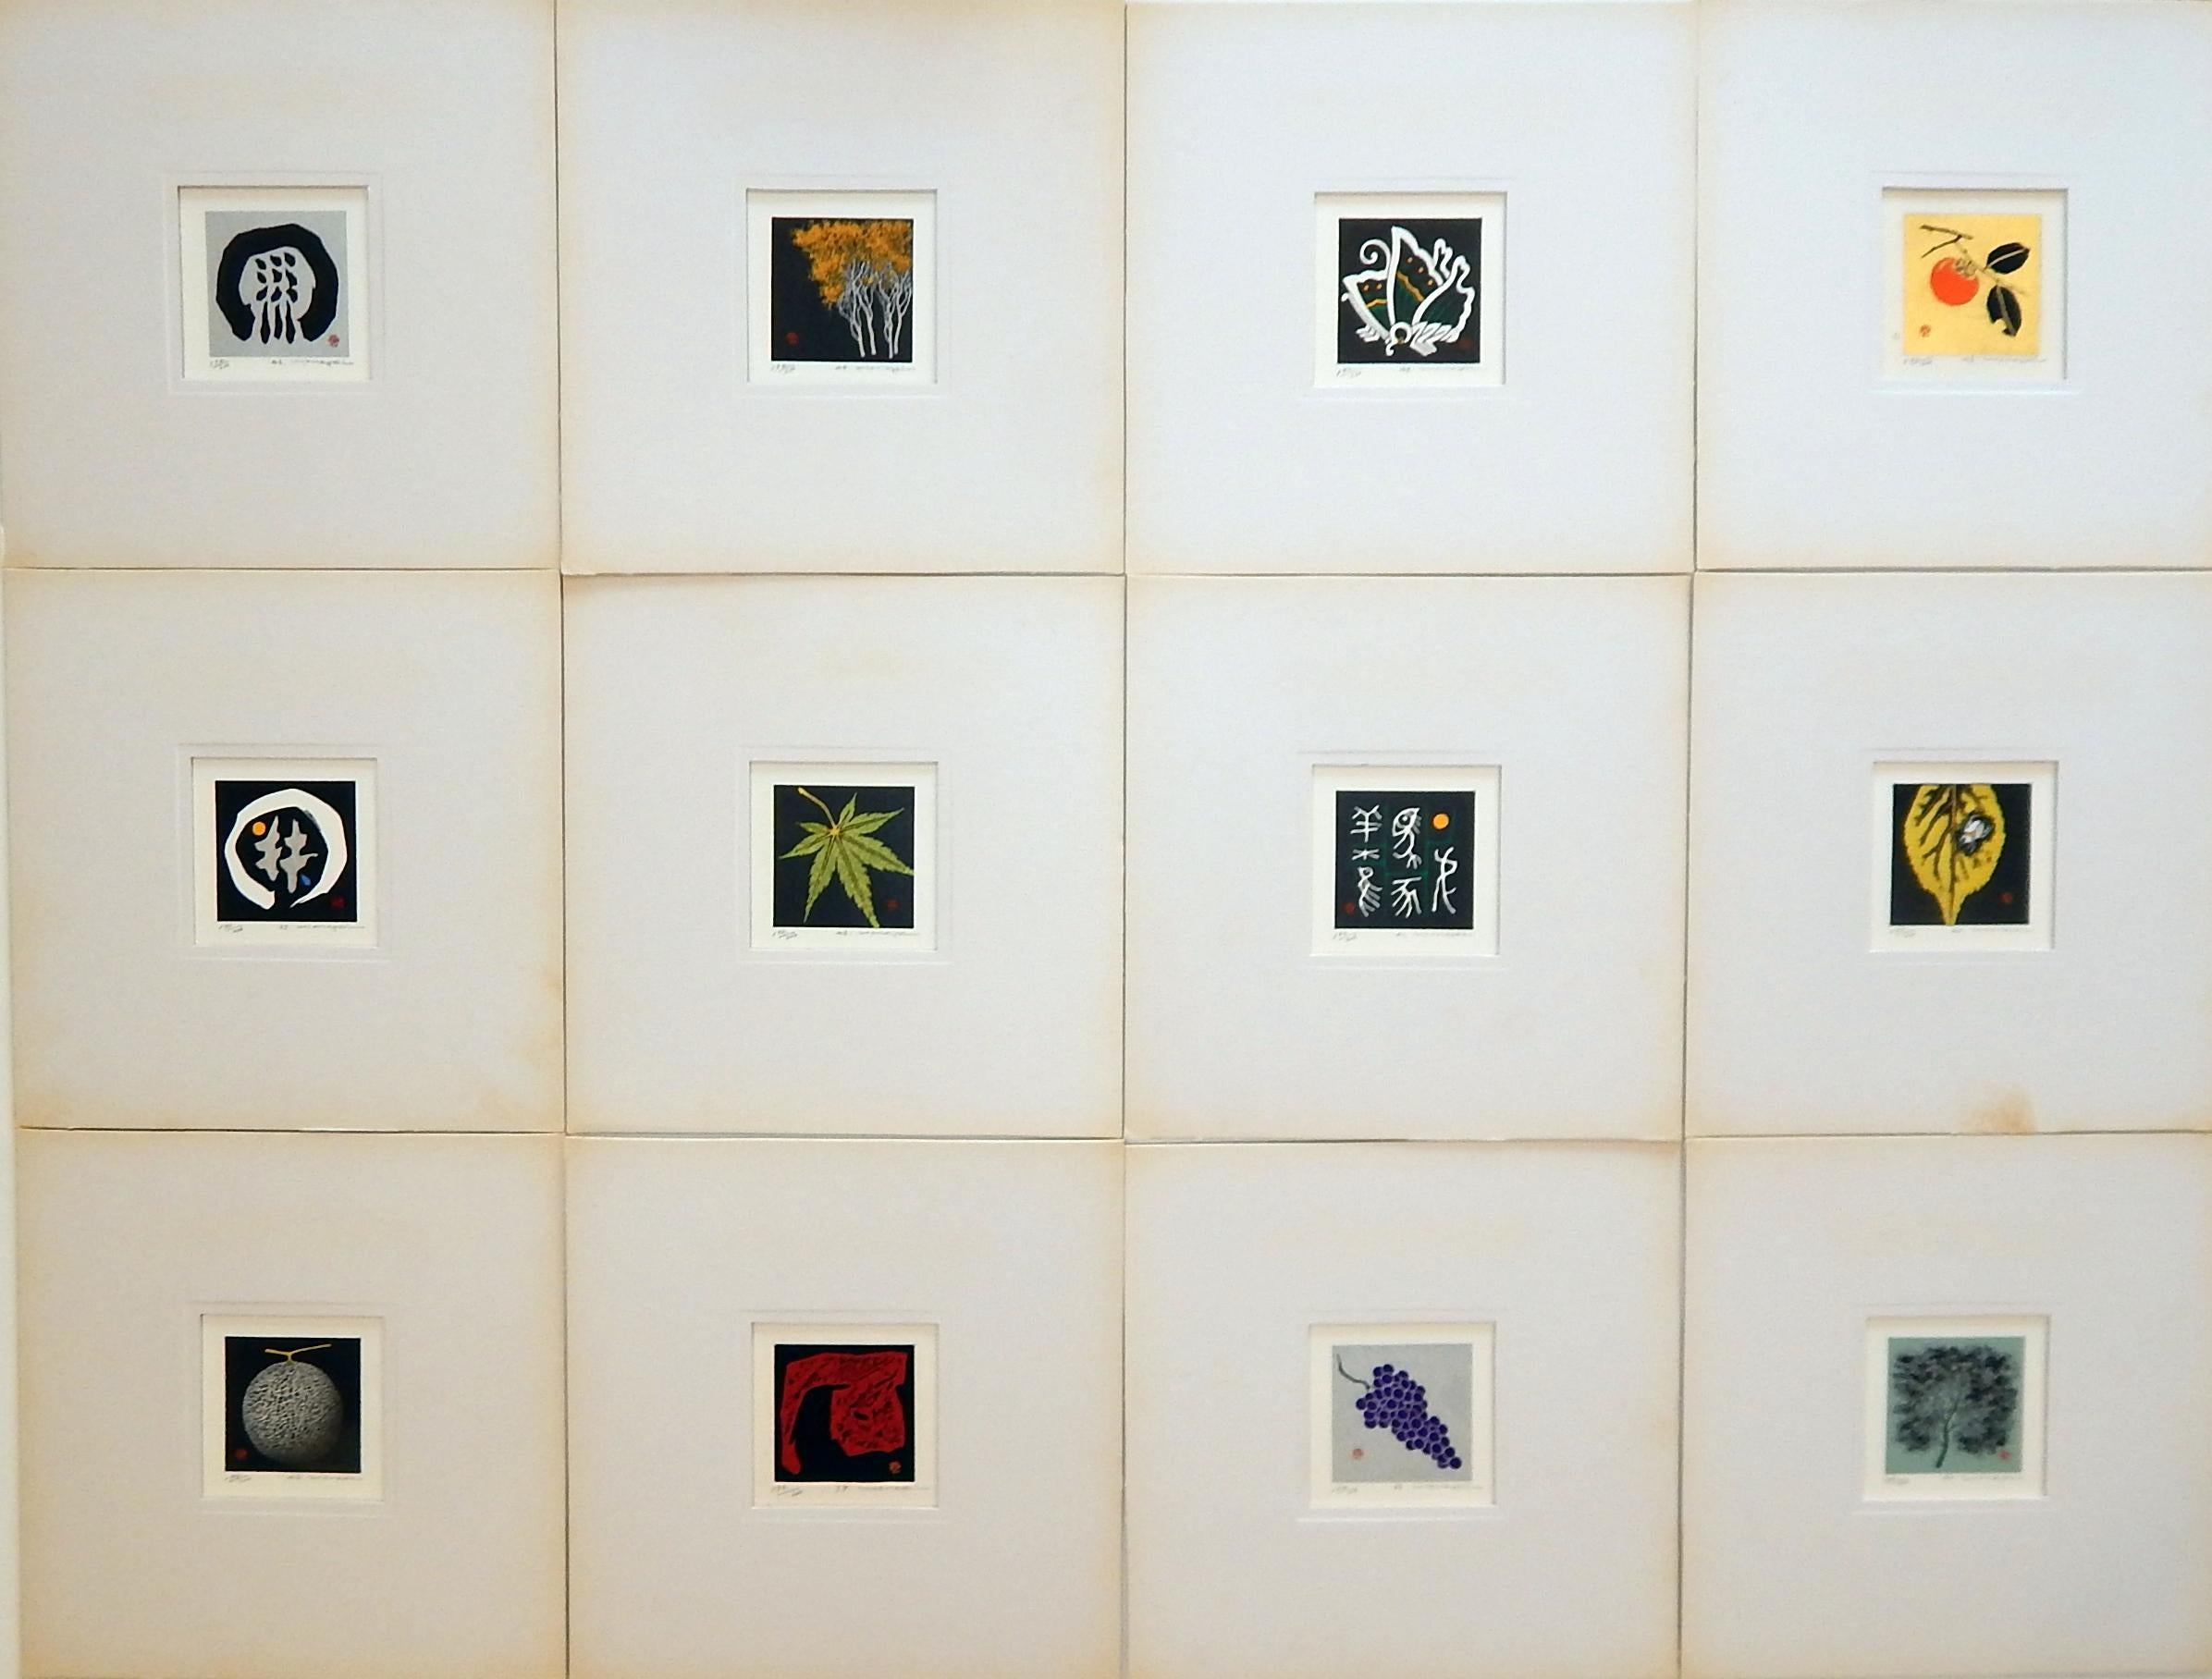 A portfolio of 12 miniature woodblock prints by Japanese artist Haku Maki (1924-2000).
The prints are contained in the original cloth bound portfolio. Prints 37-48.
Each print is pencil signed by the artist lower right and numbered 192/200 with